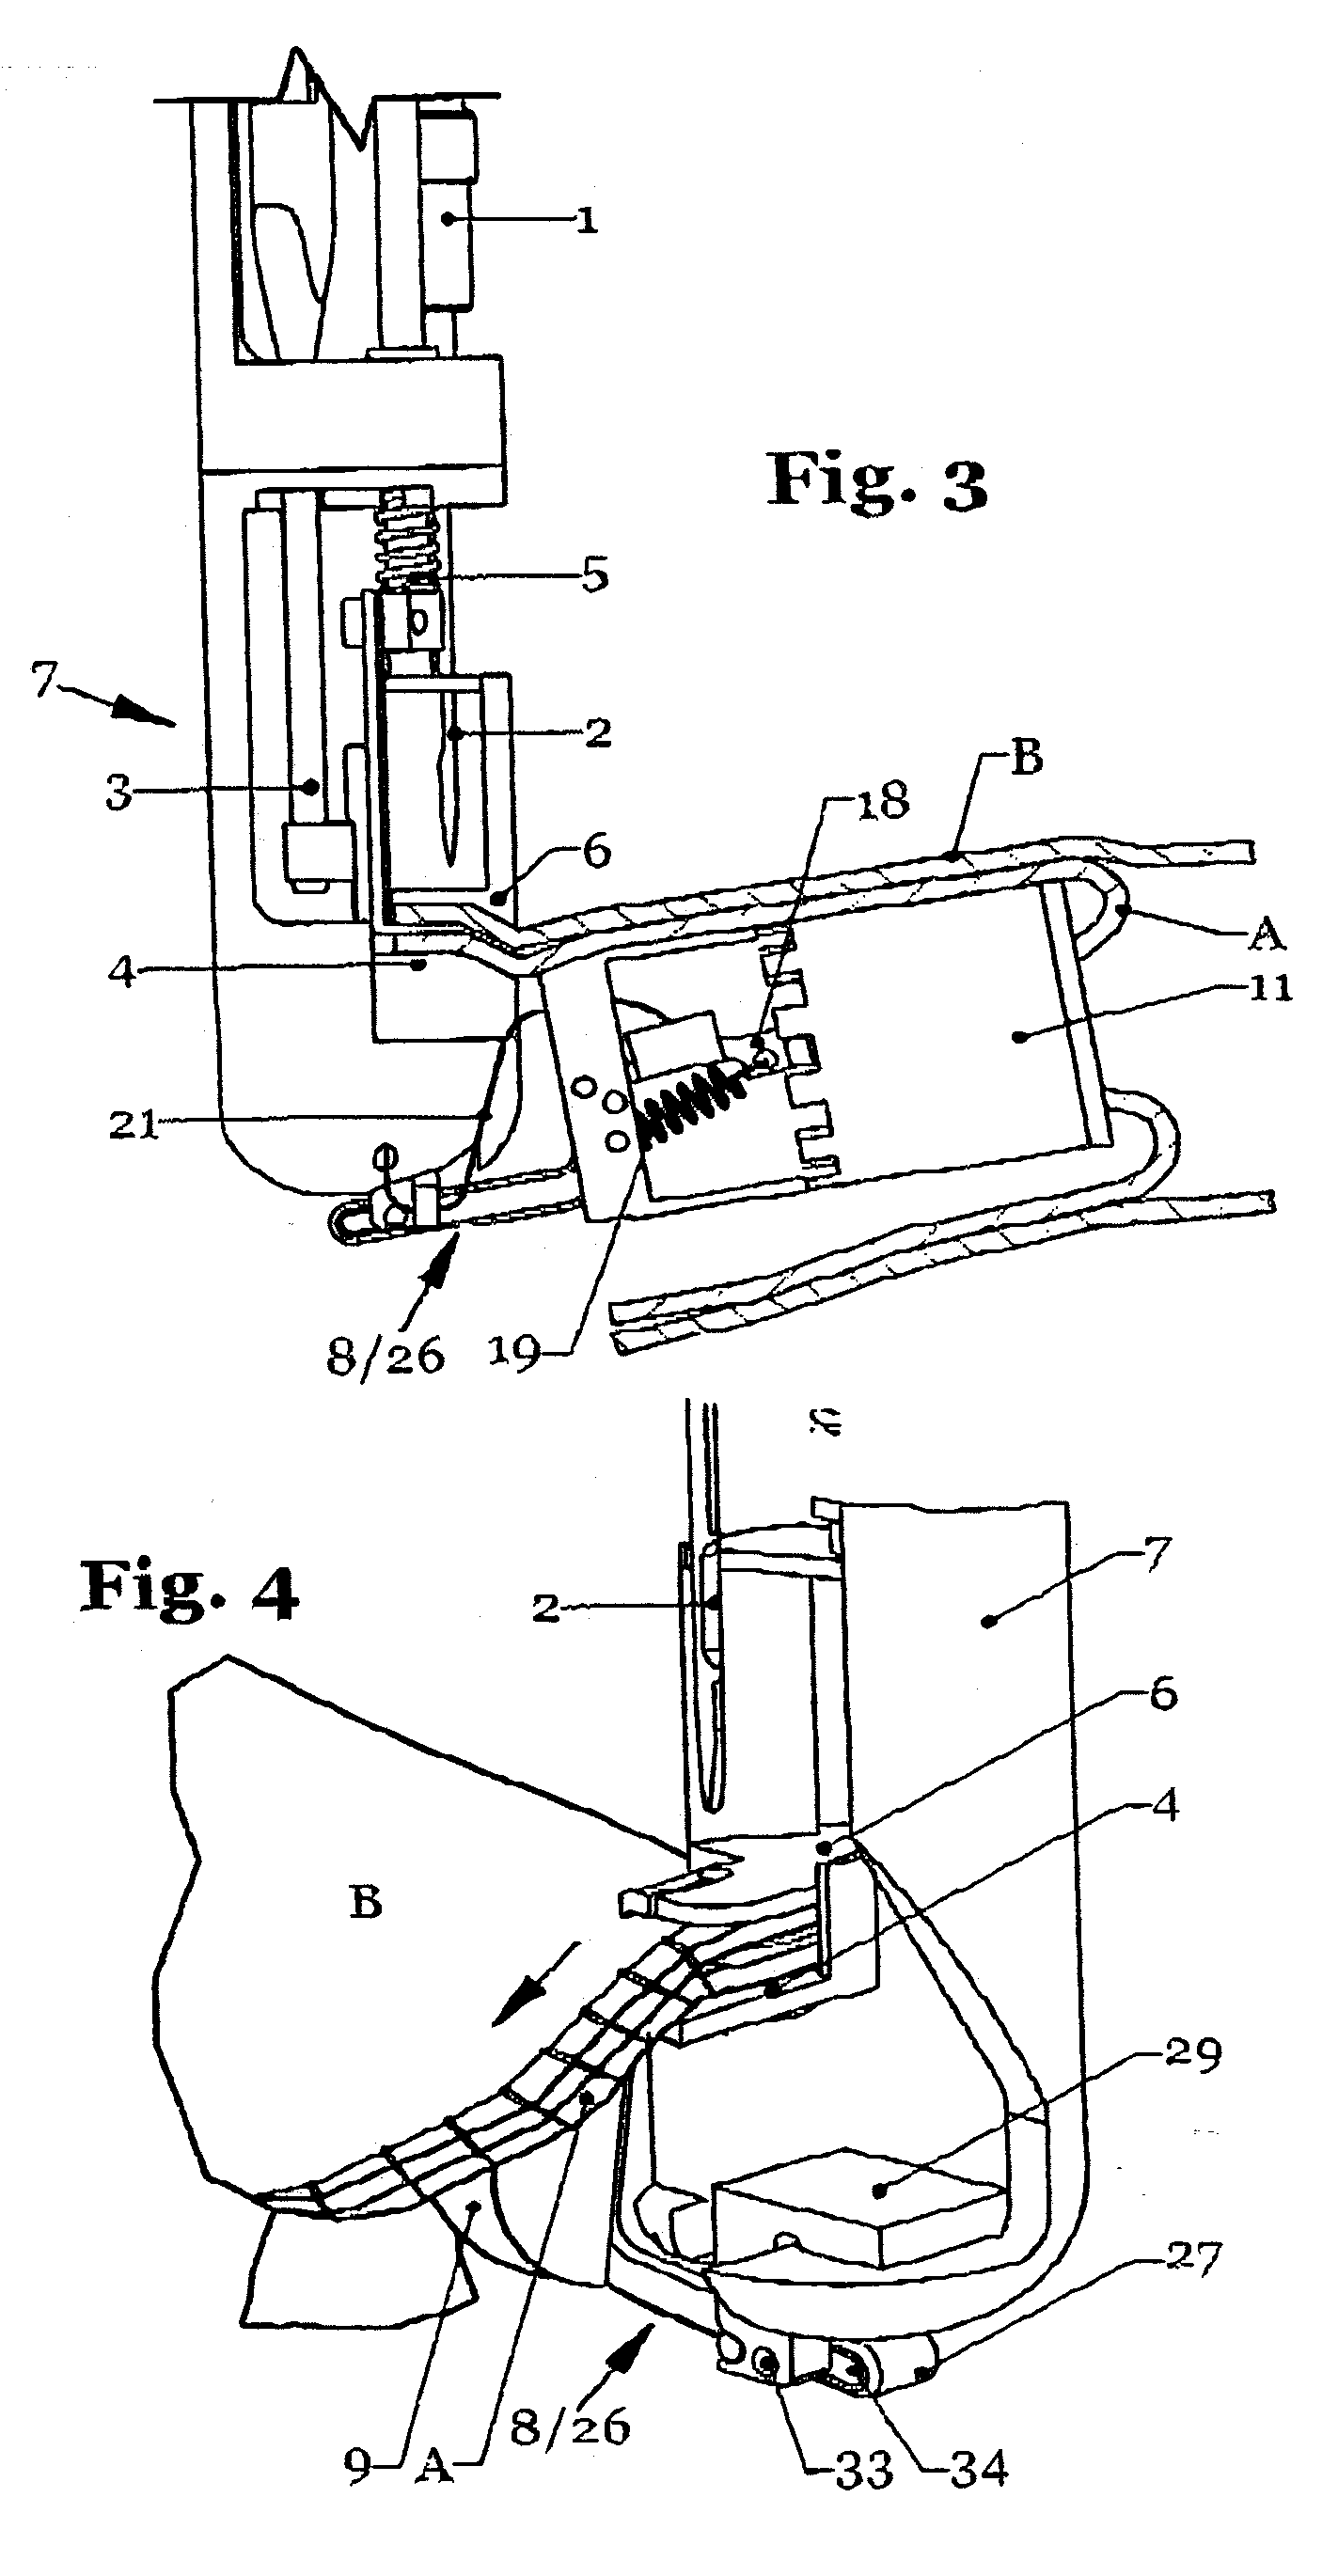 Device attachable to a surgical suturing machine for forming an end-to end anastomosis on two hollow organs